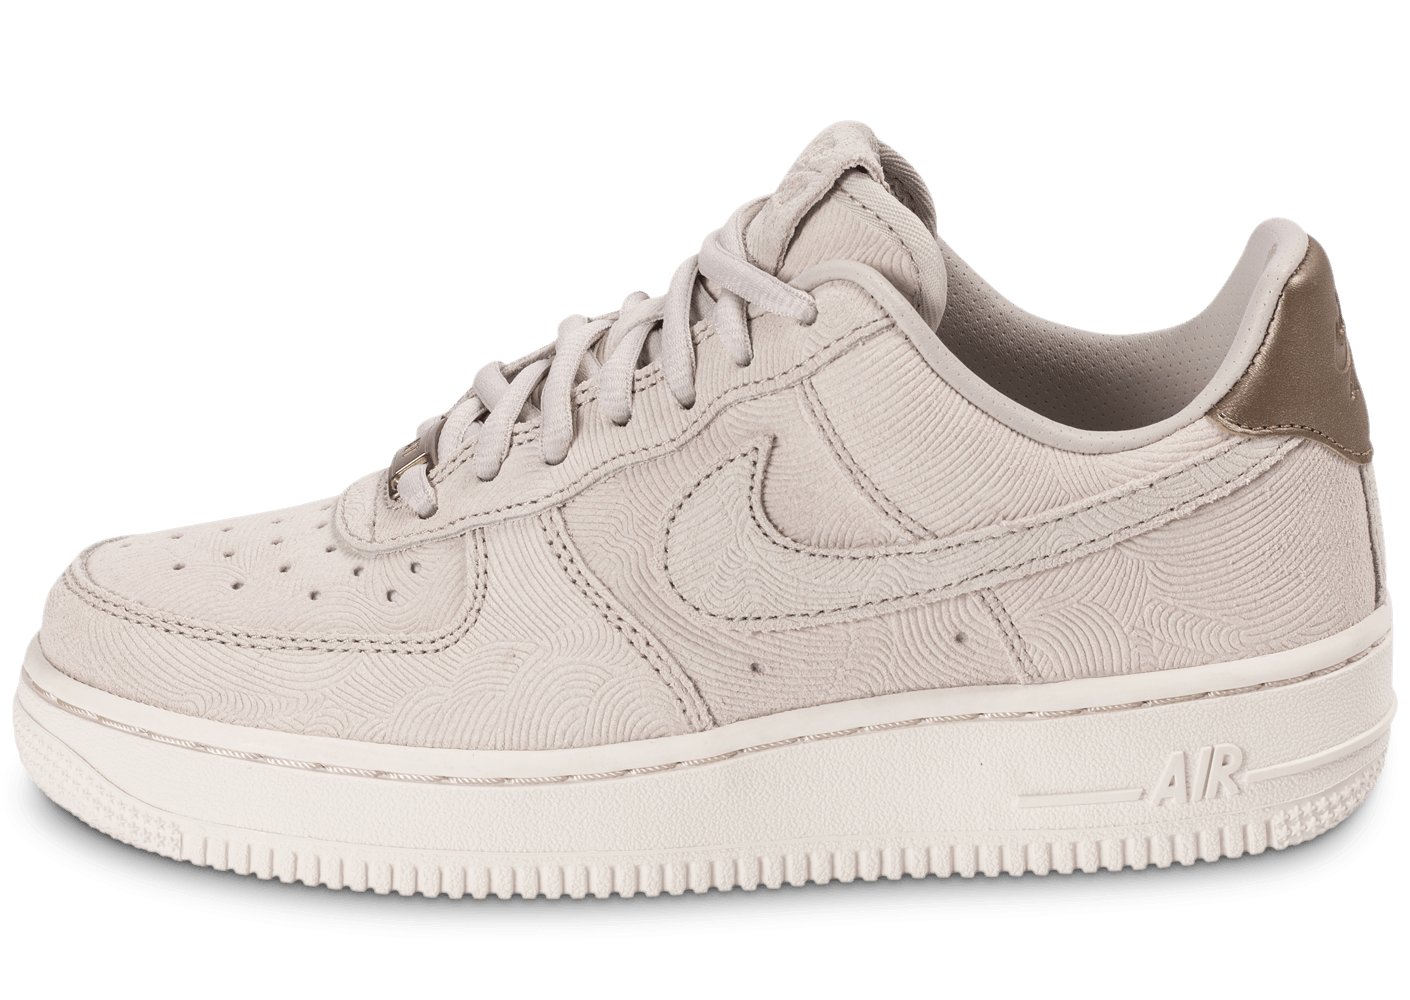 nike air force 1 femme grise, Nike Air Force 1 Premium Suede Gamma grey - Chaussures Femme - Chausport